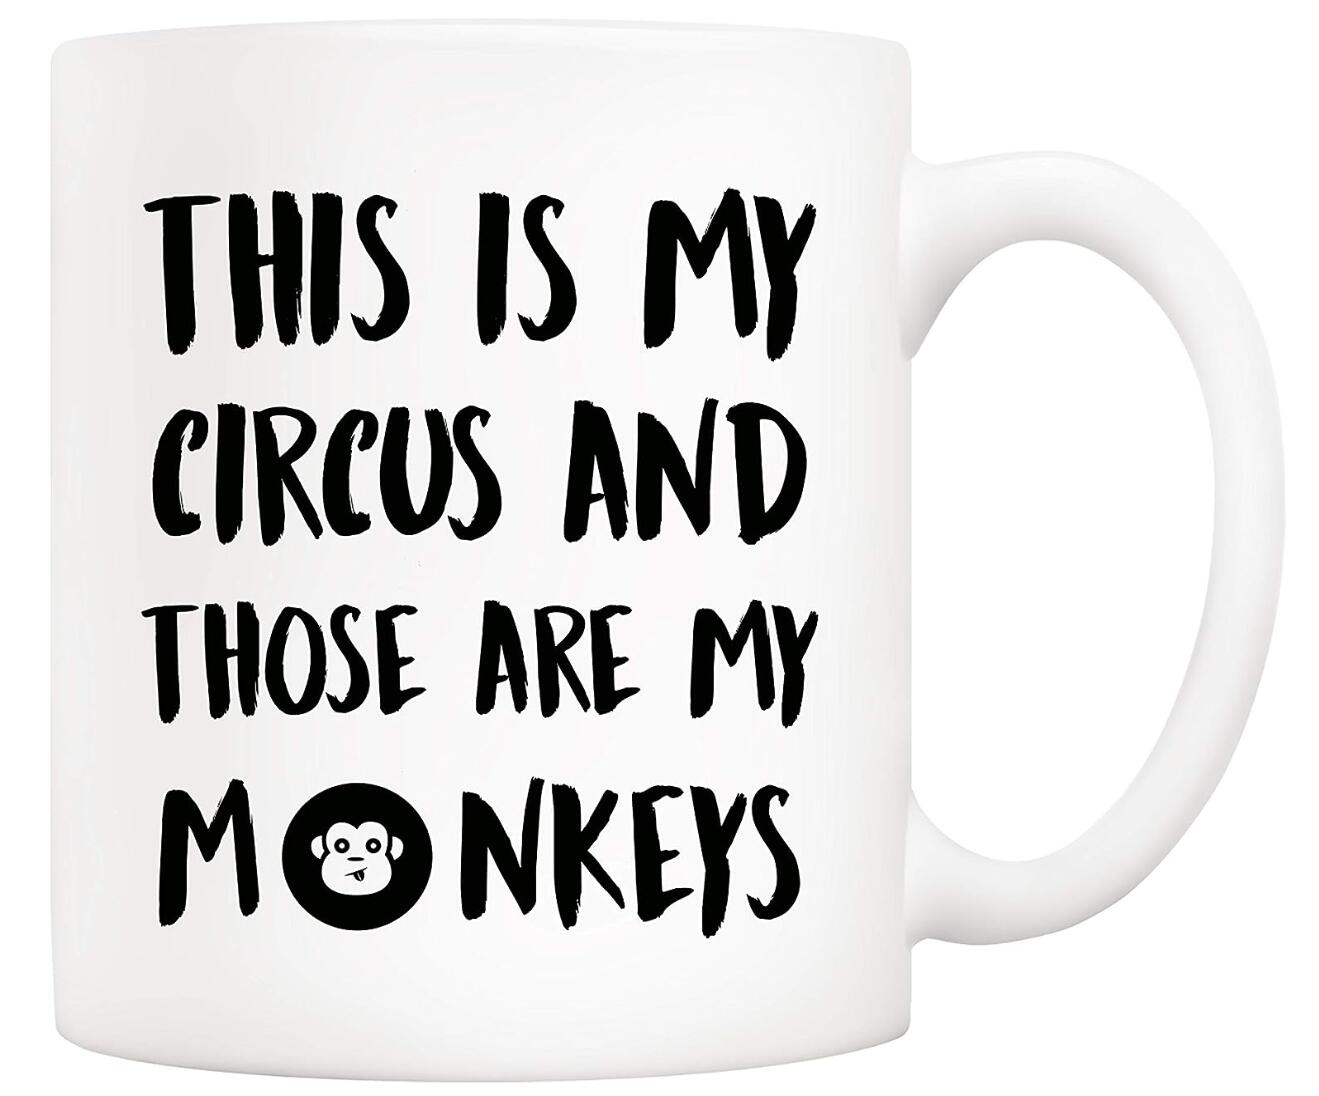 This Is My Circus and Those Are My Monkeys Coffee Mug Christmas Gifts Funny Ceramic Cup